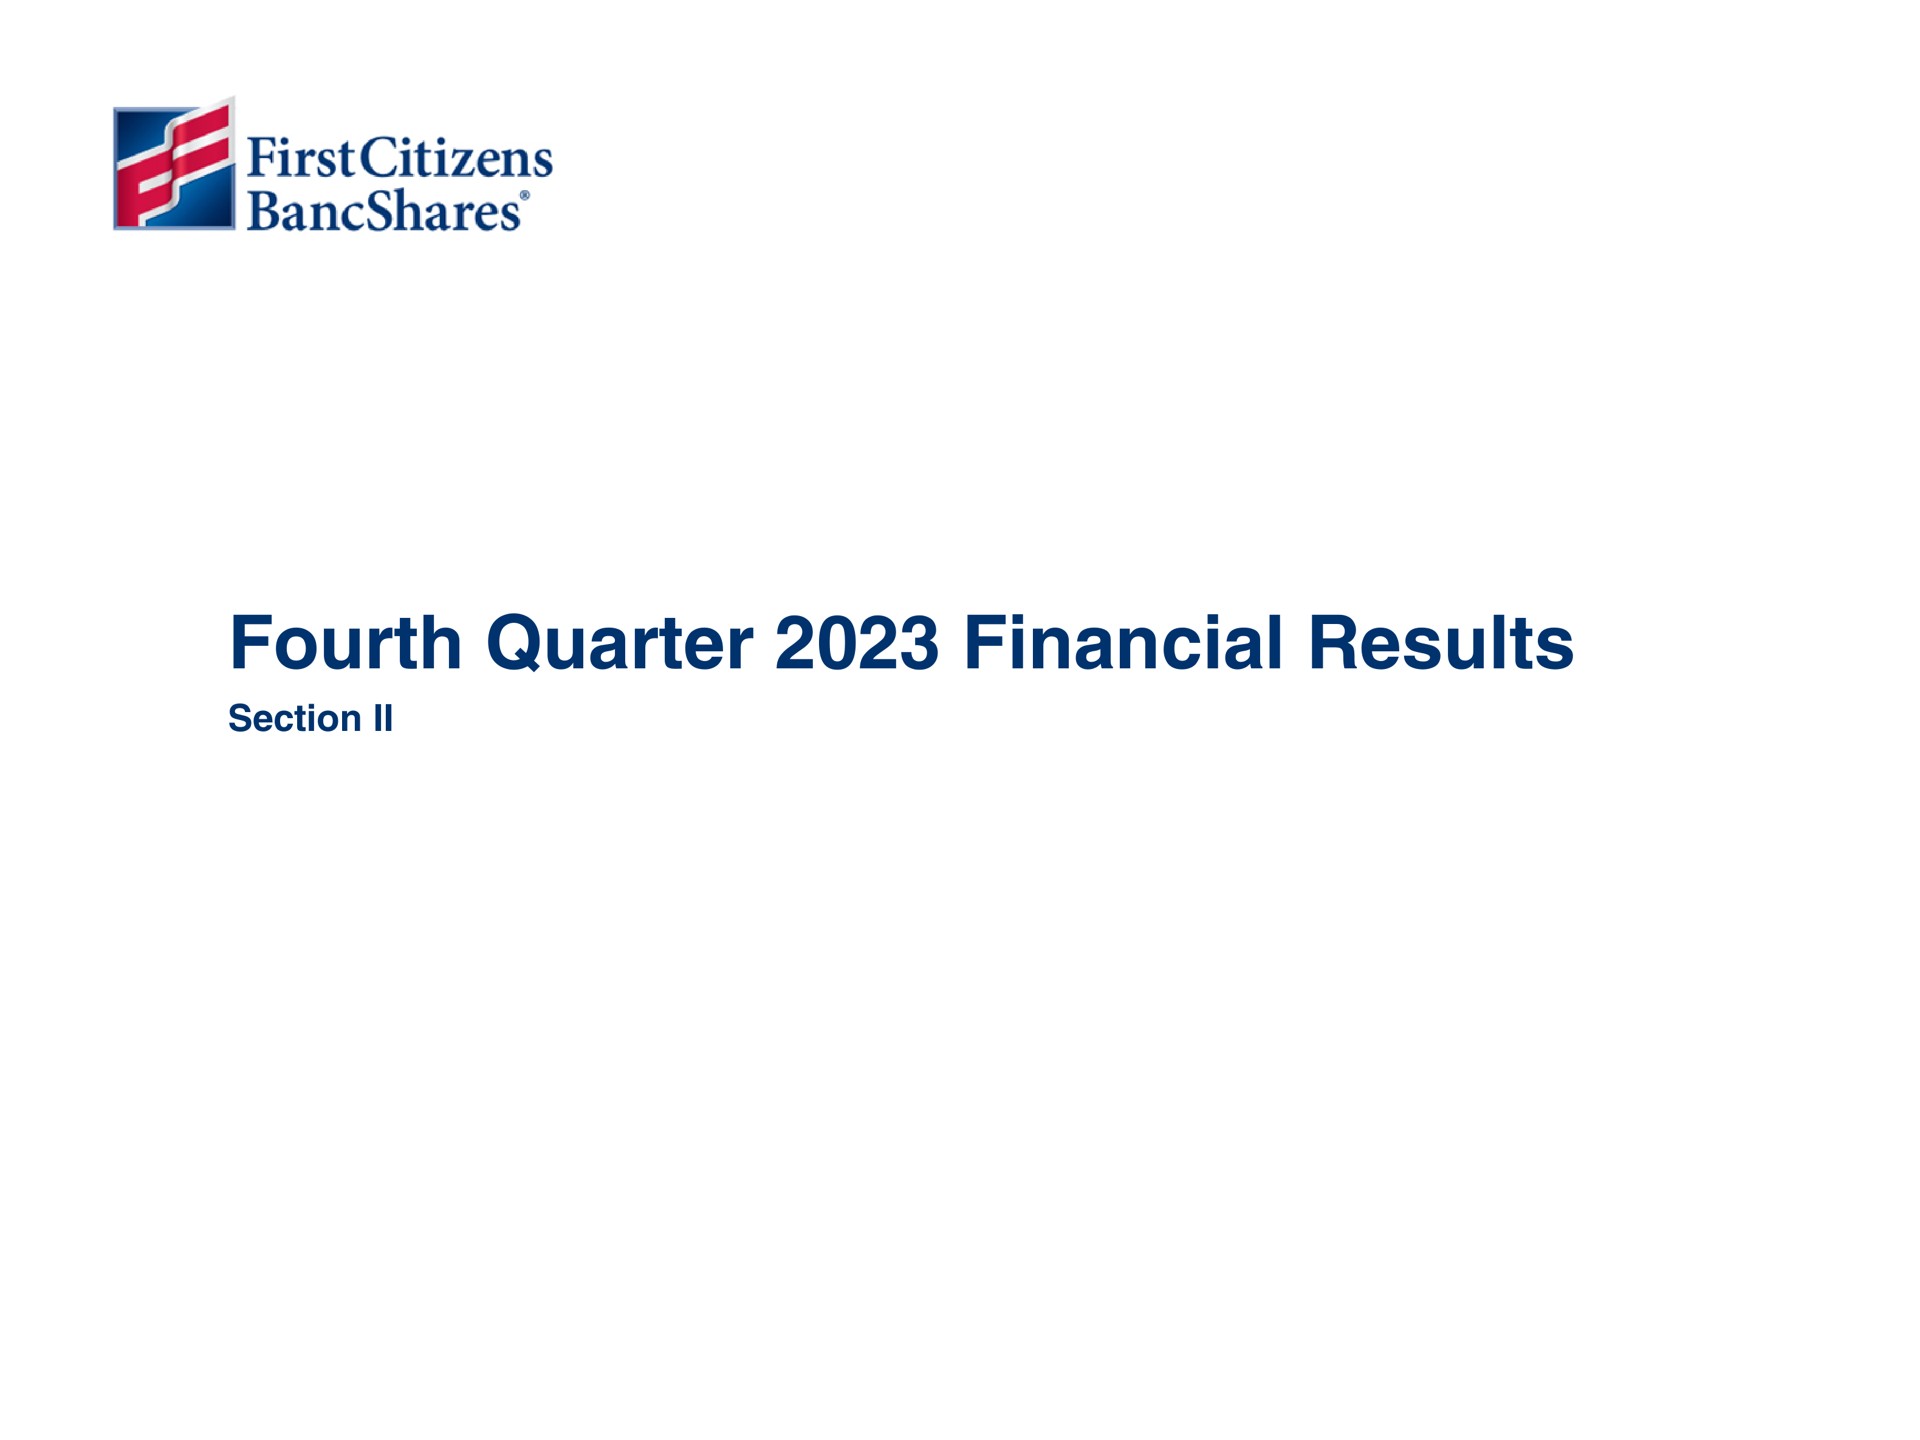 fourth quarter financial results section first citizens | First Citizens BancShares